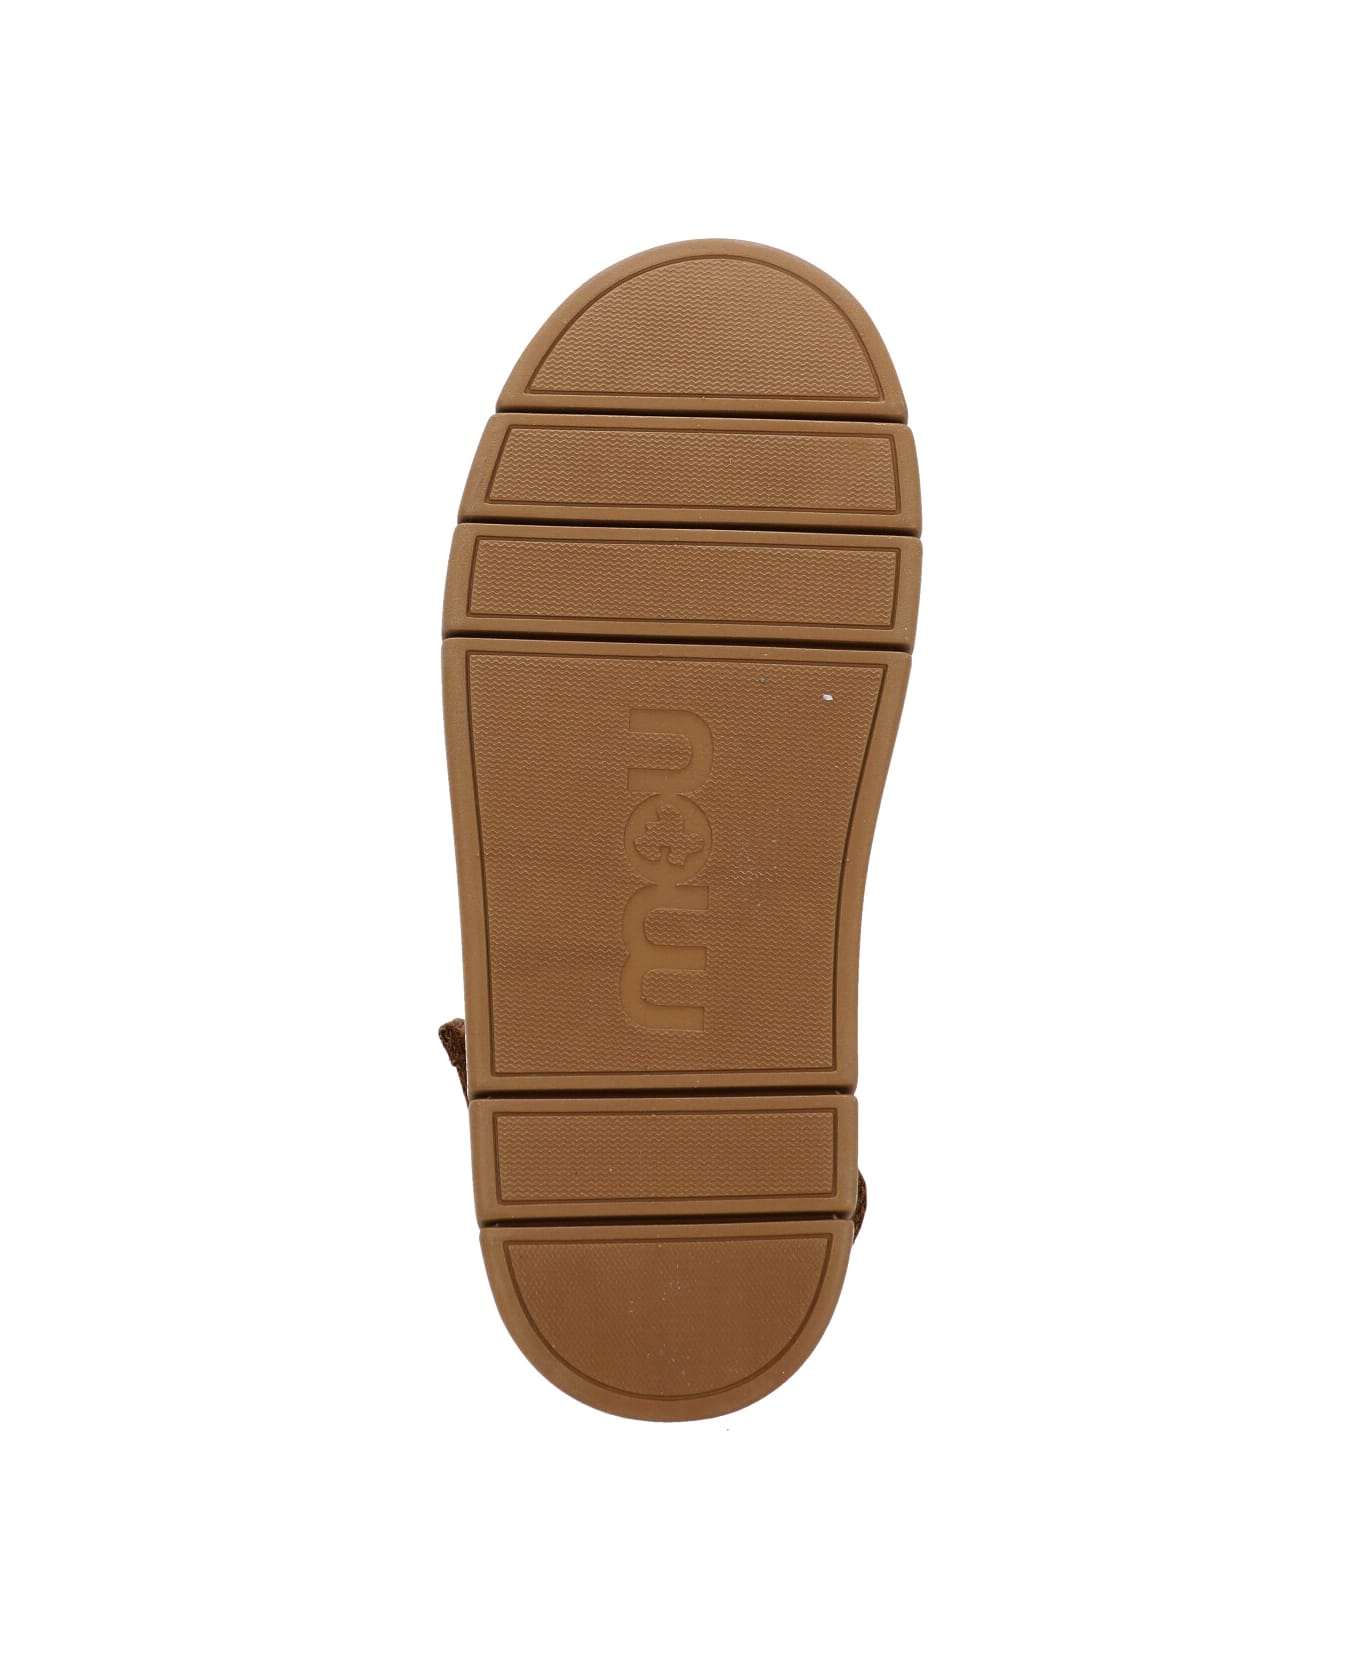 Mou Bounce Sandals - Brown サンダル